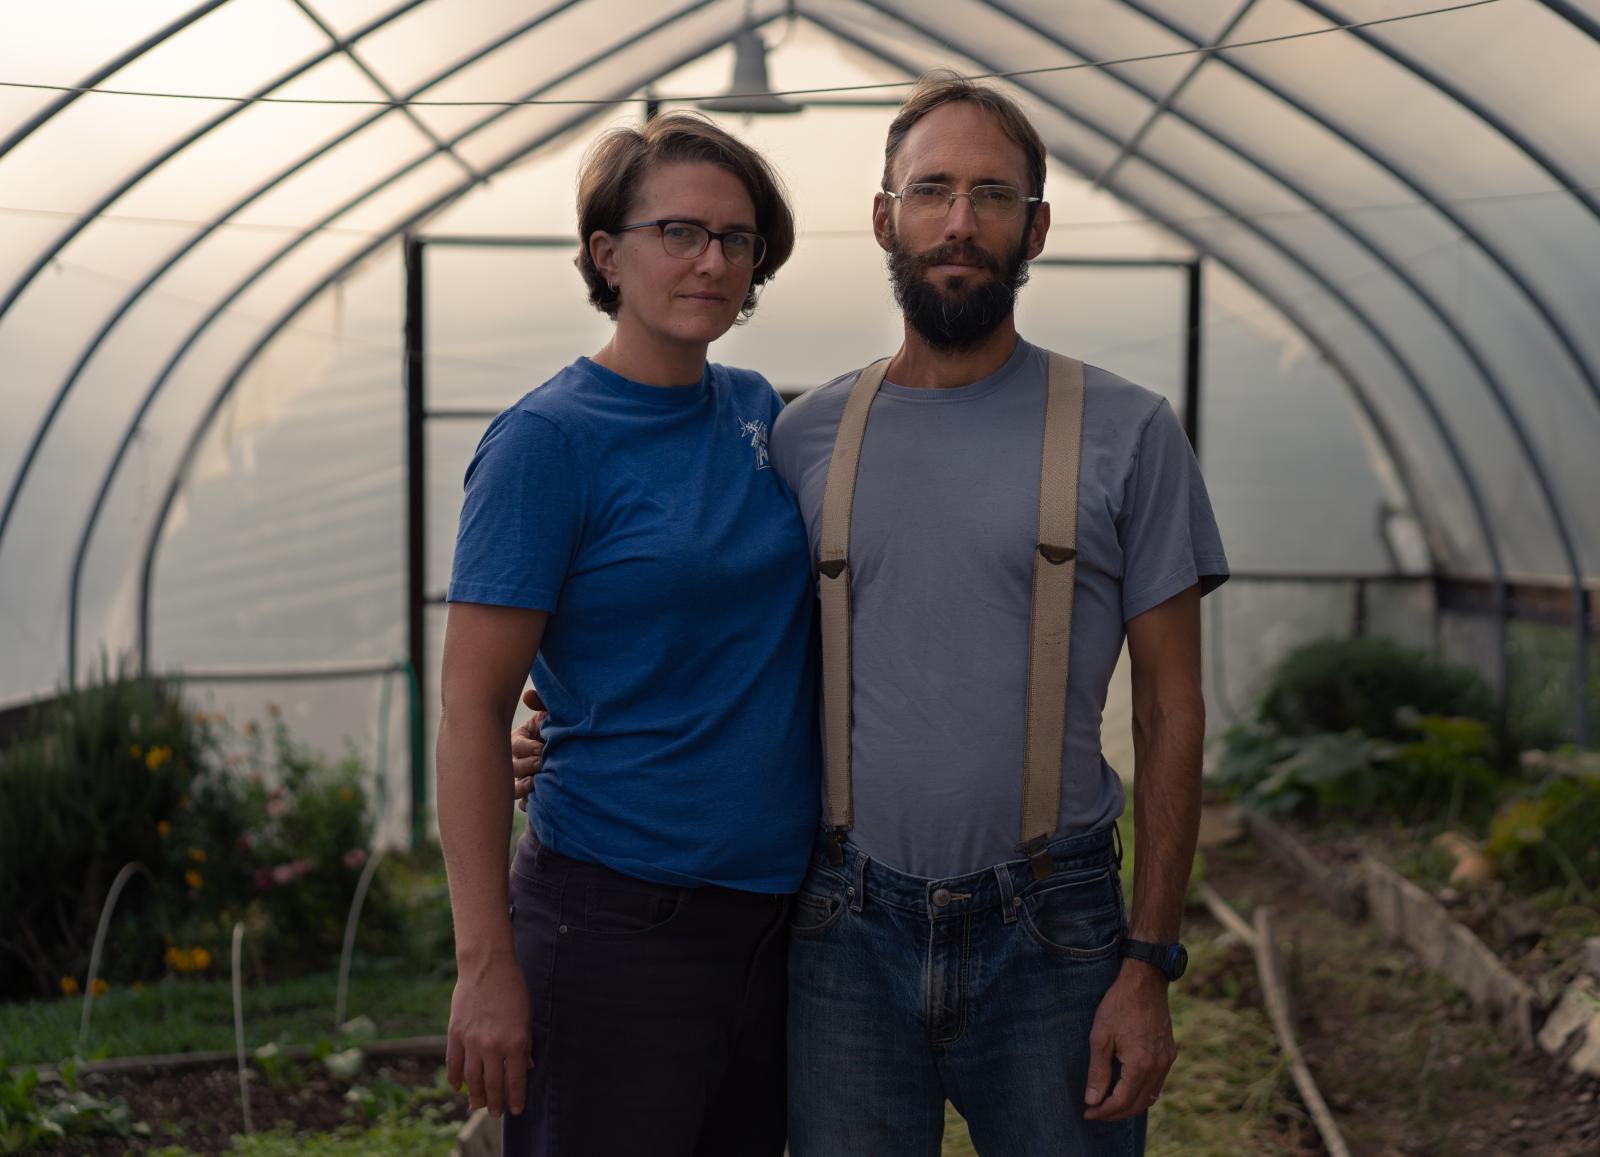 A Spirit of Abundance for Commonweal Magazine - Colleen and Eric Fitts, cofounders of Bethlehem Farm, stand in the hoop house where vegetables...